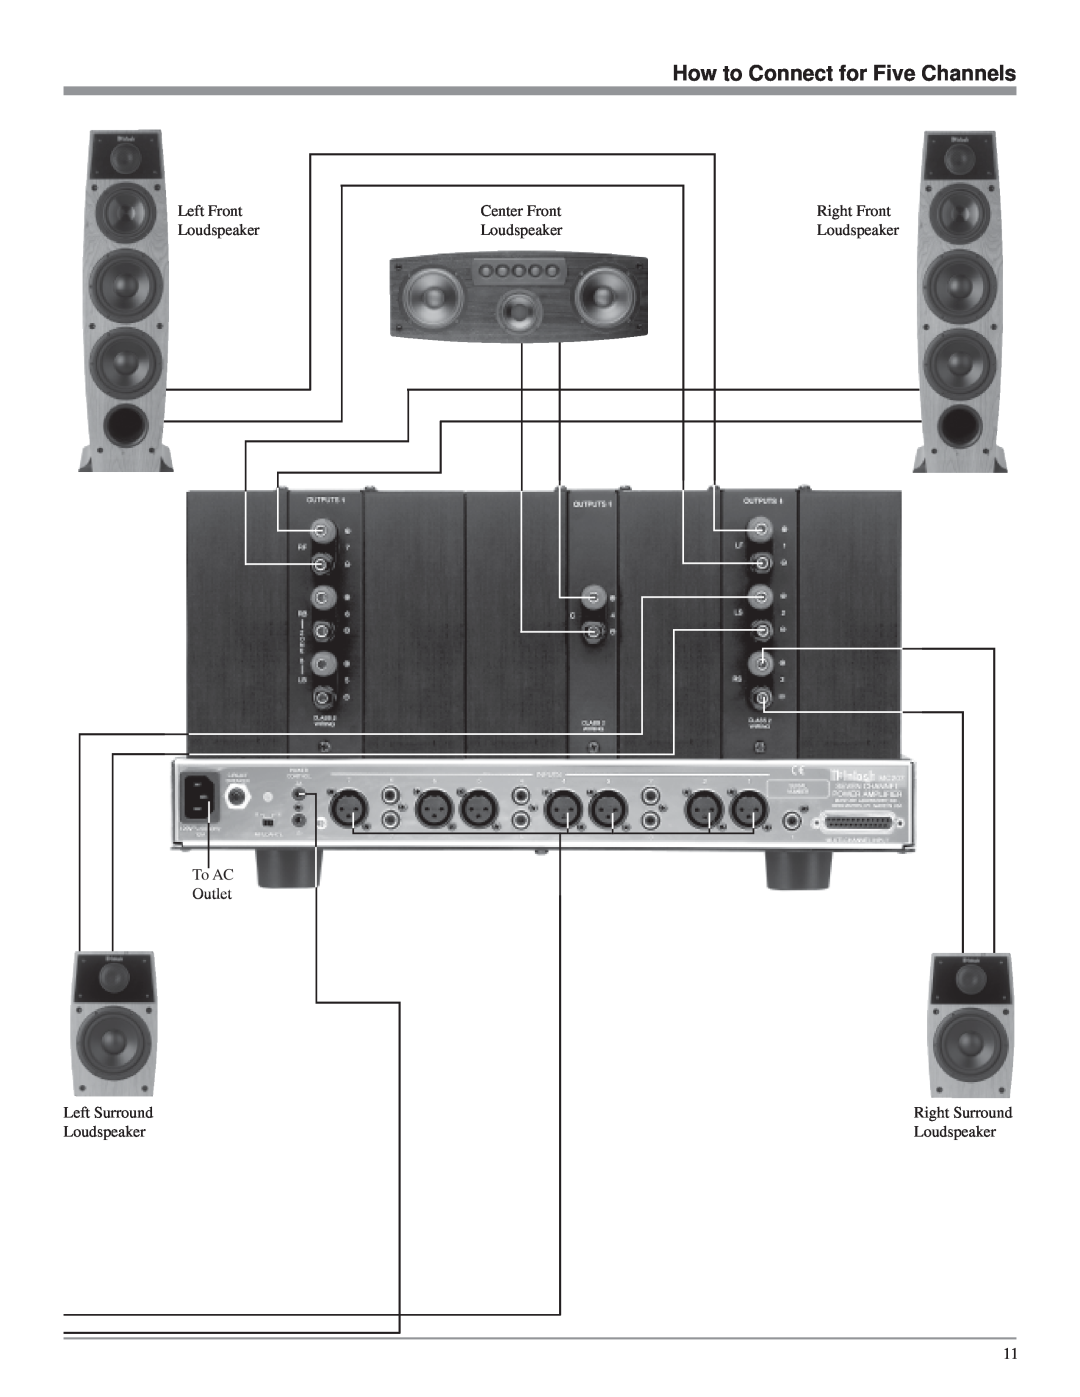 McIntosh MC207 owner manual How to Connect for Five Channels, Left Front Loudspeaker To AC Outlet Left Surround 